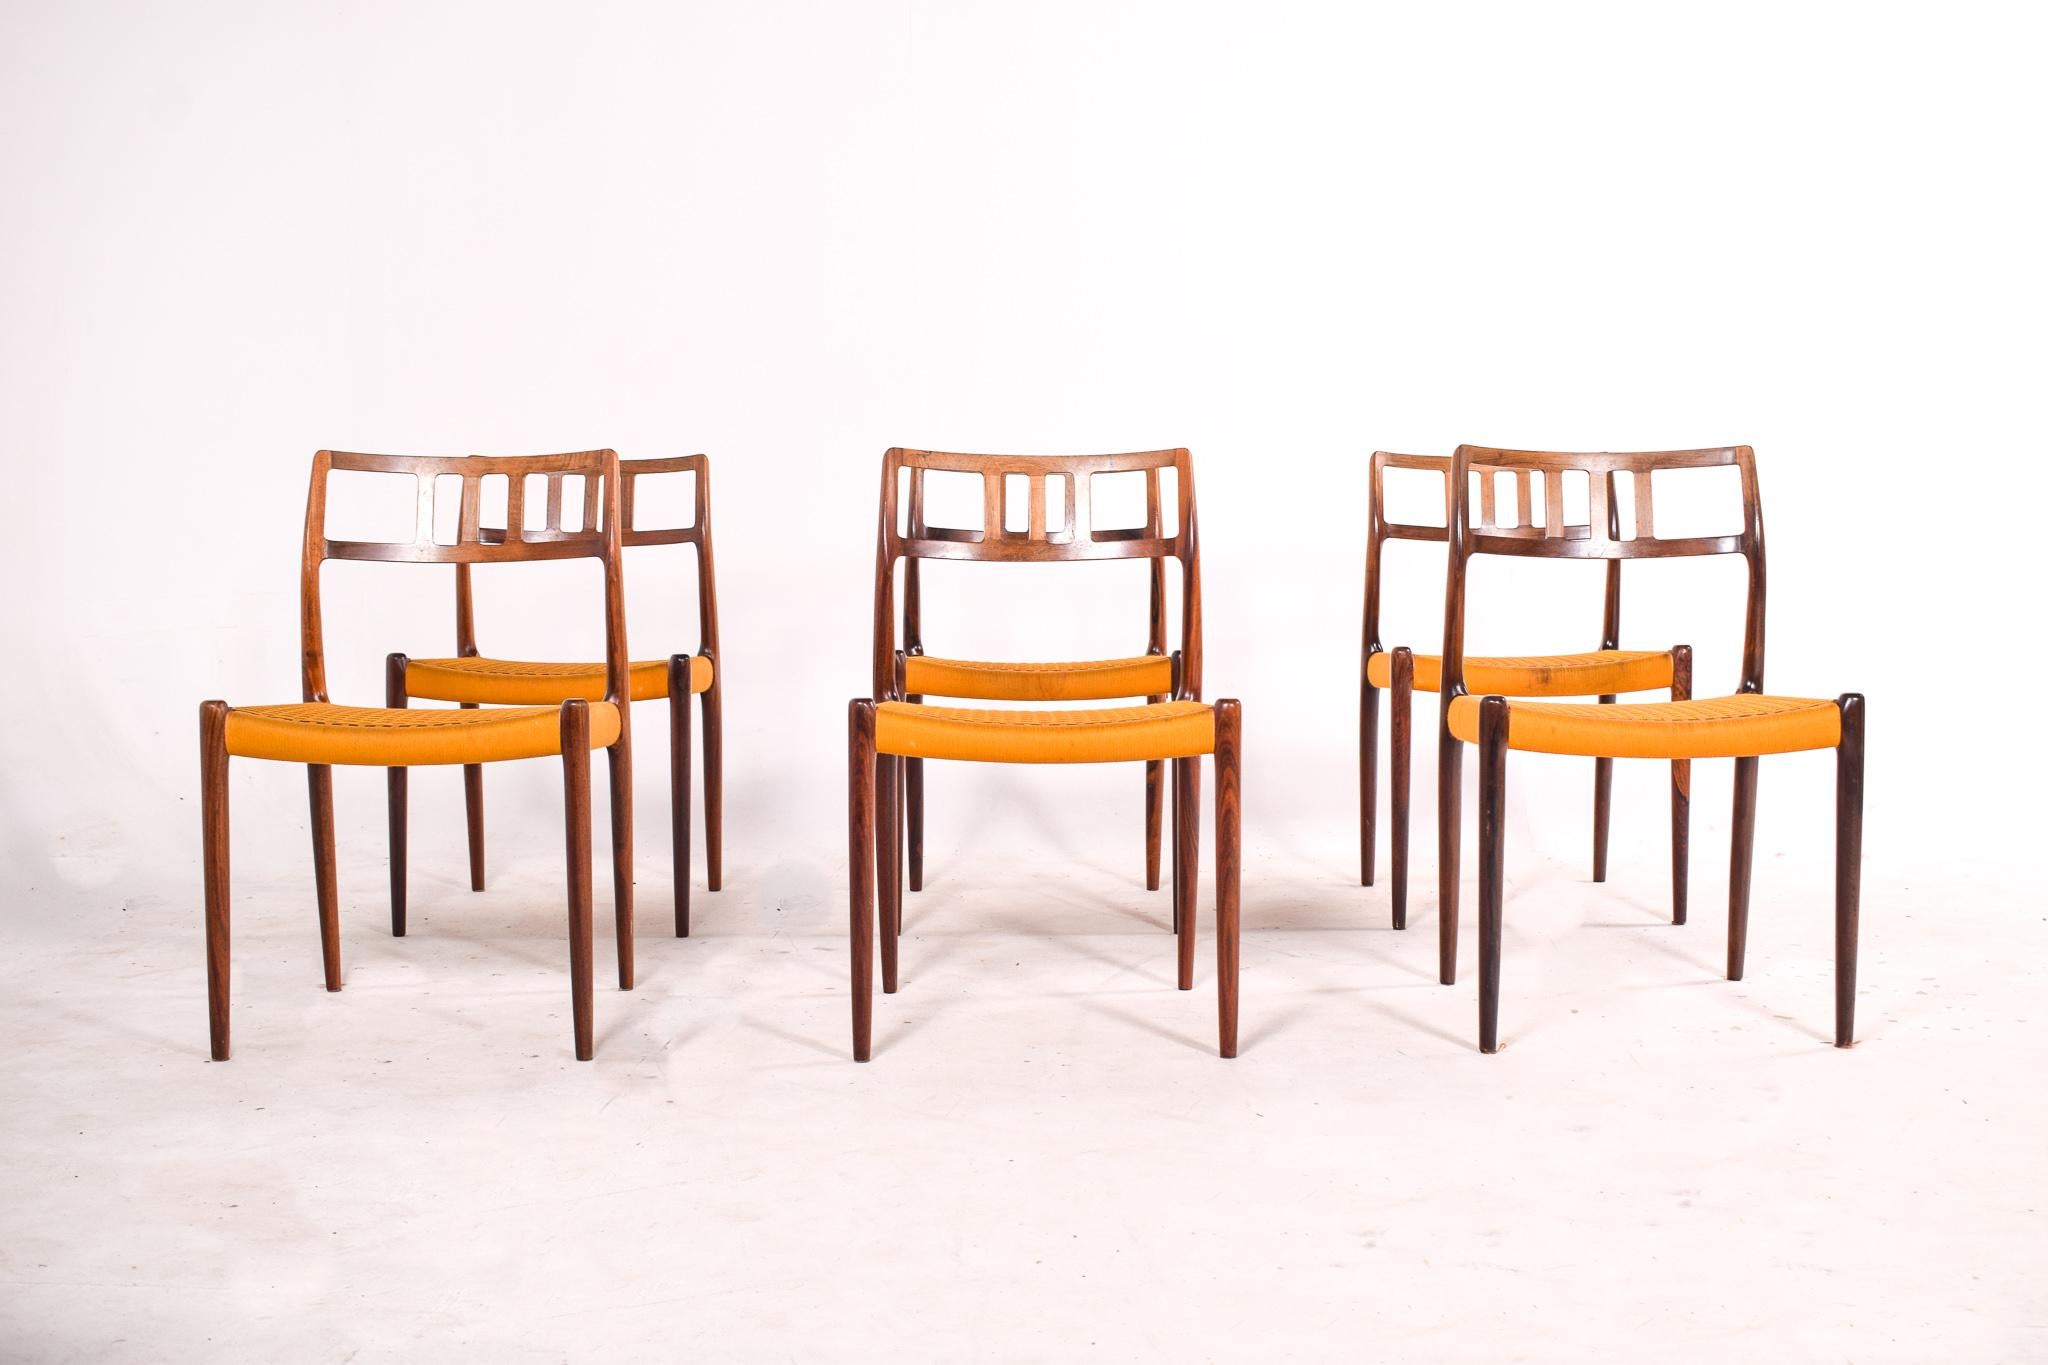 Set of 6 rosewood dining chairs by Niels Moller, model 79. This chairs manufactured by J.L. Møller Mobelfabrik are among the most sought Danish chairs. This chairs offer comfortable seating with good back support. The seat is made of braided flat